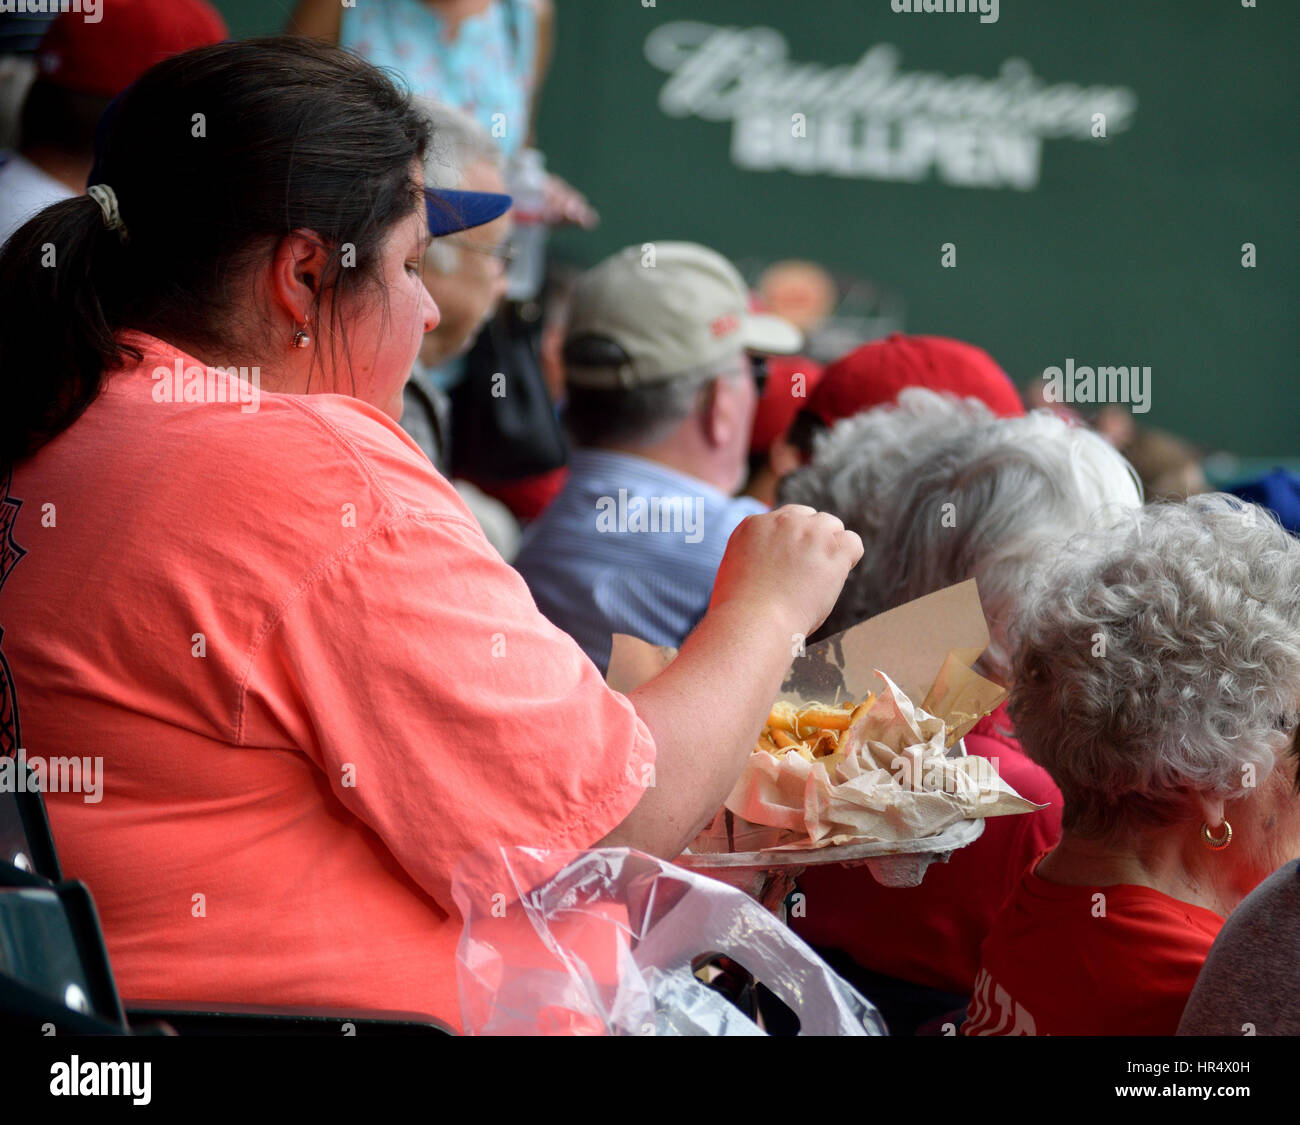 Overweight woman eating food at a baseball game Stock Photo